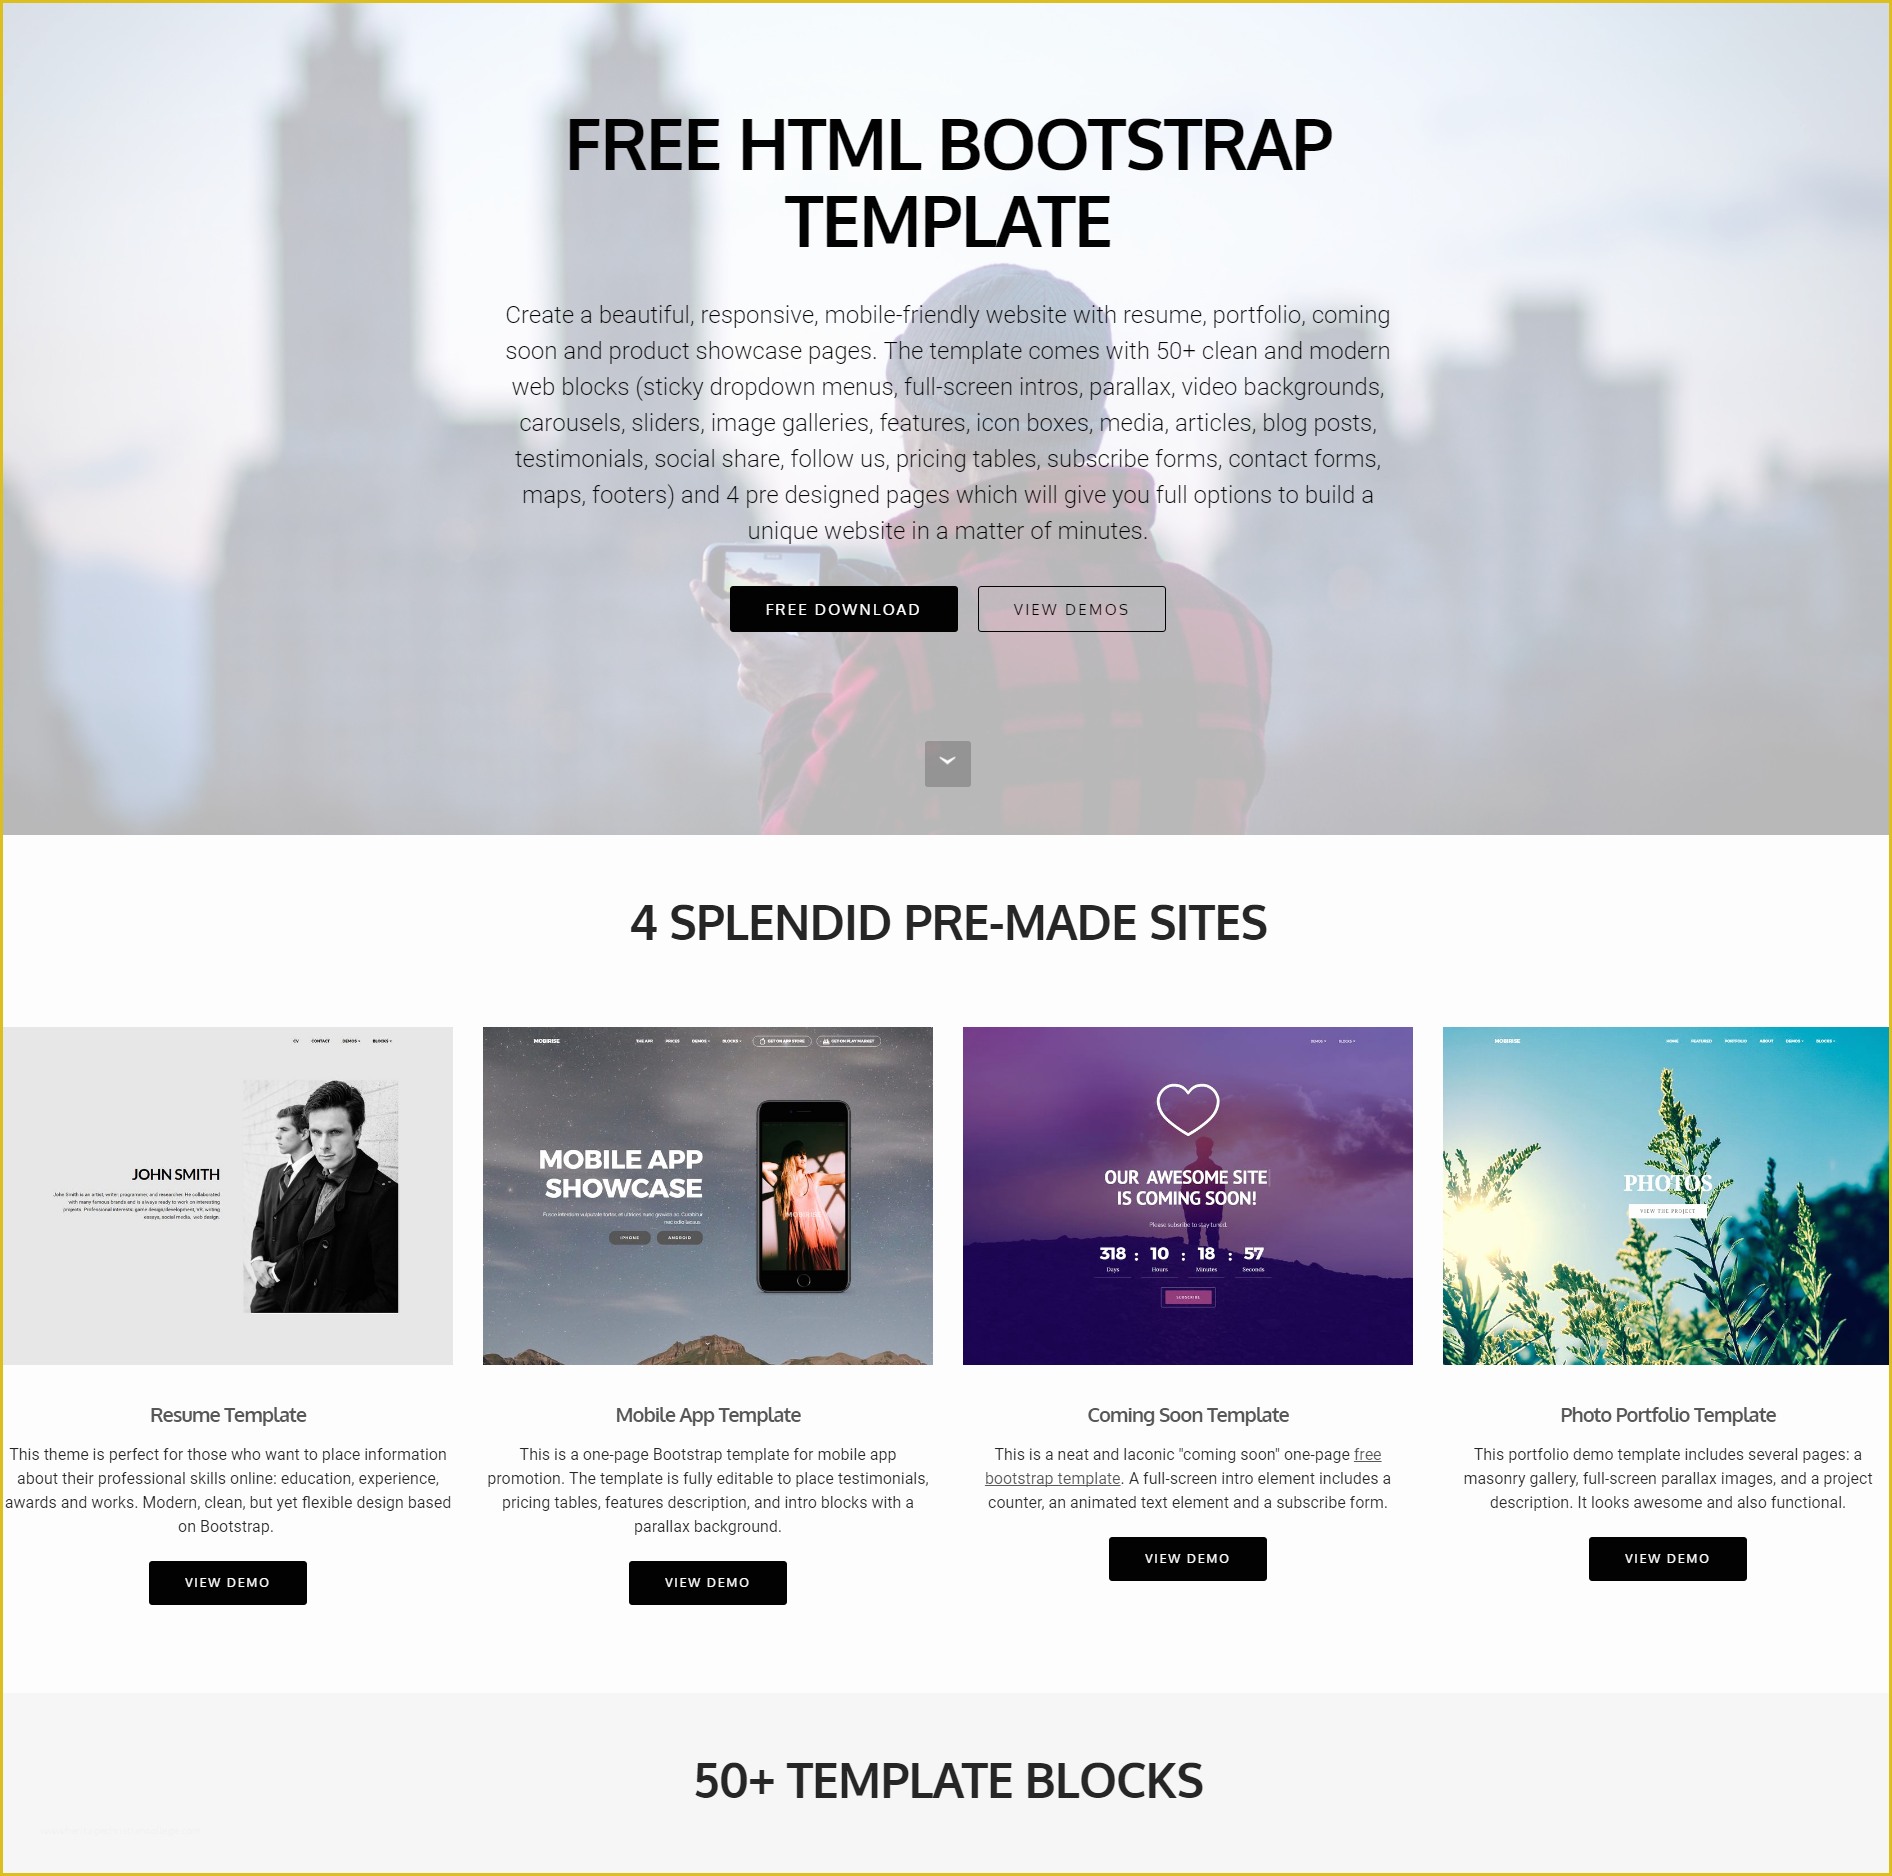 Free Website Templates Of 39 Brand New Free HTML Bootstrap Templates 2019